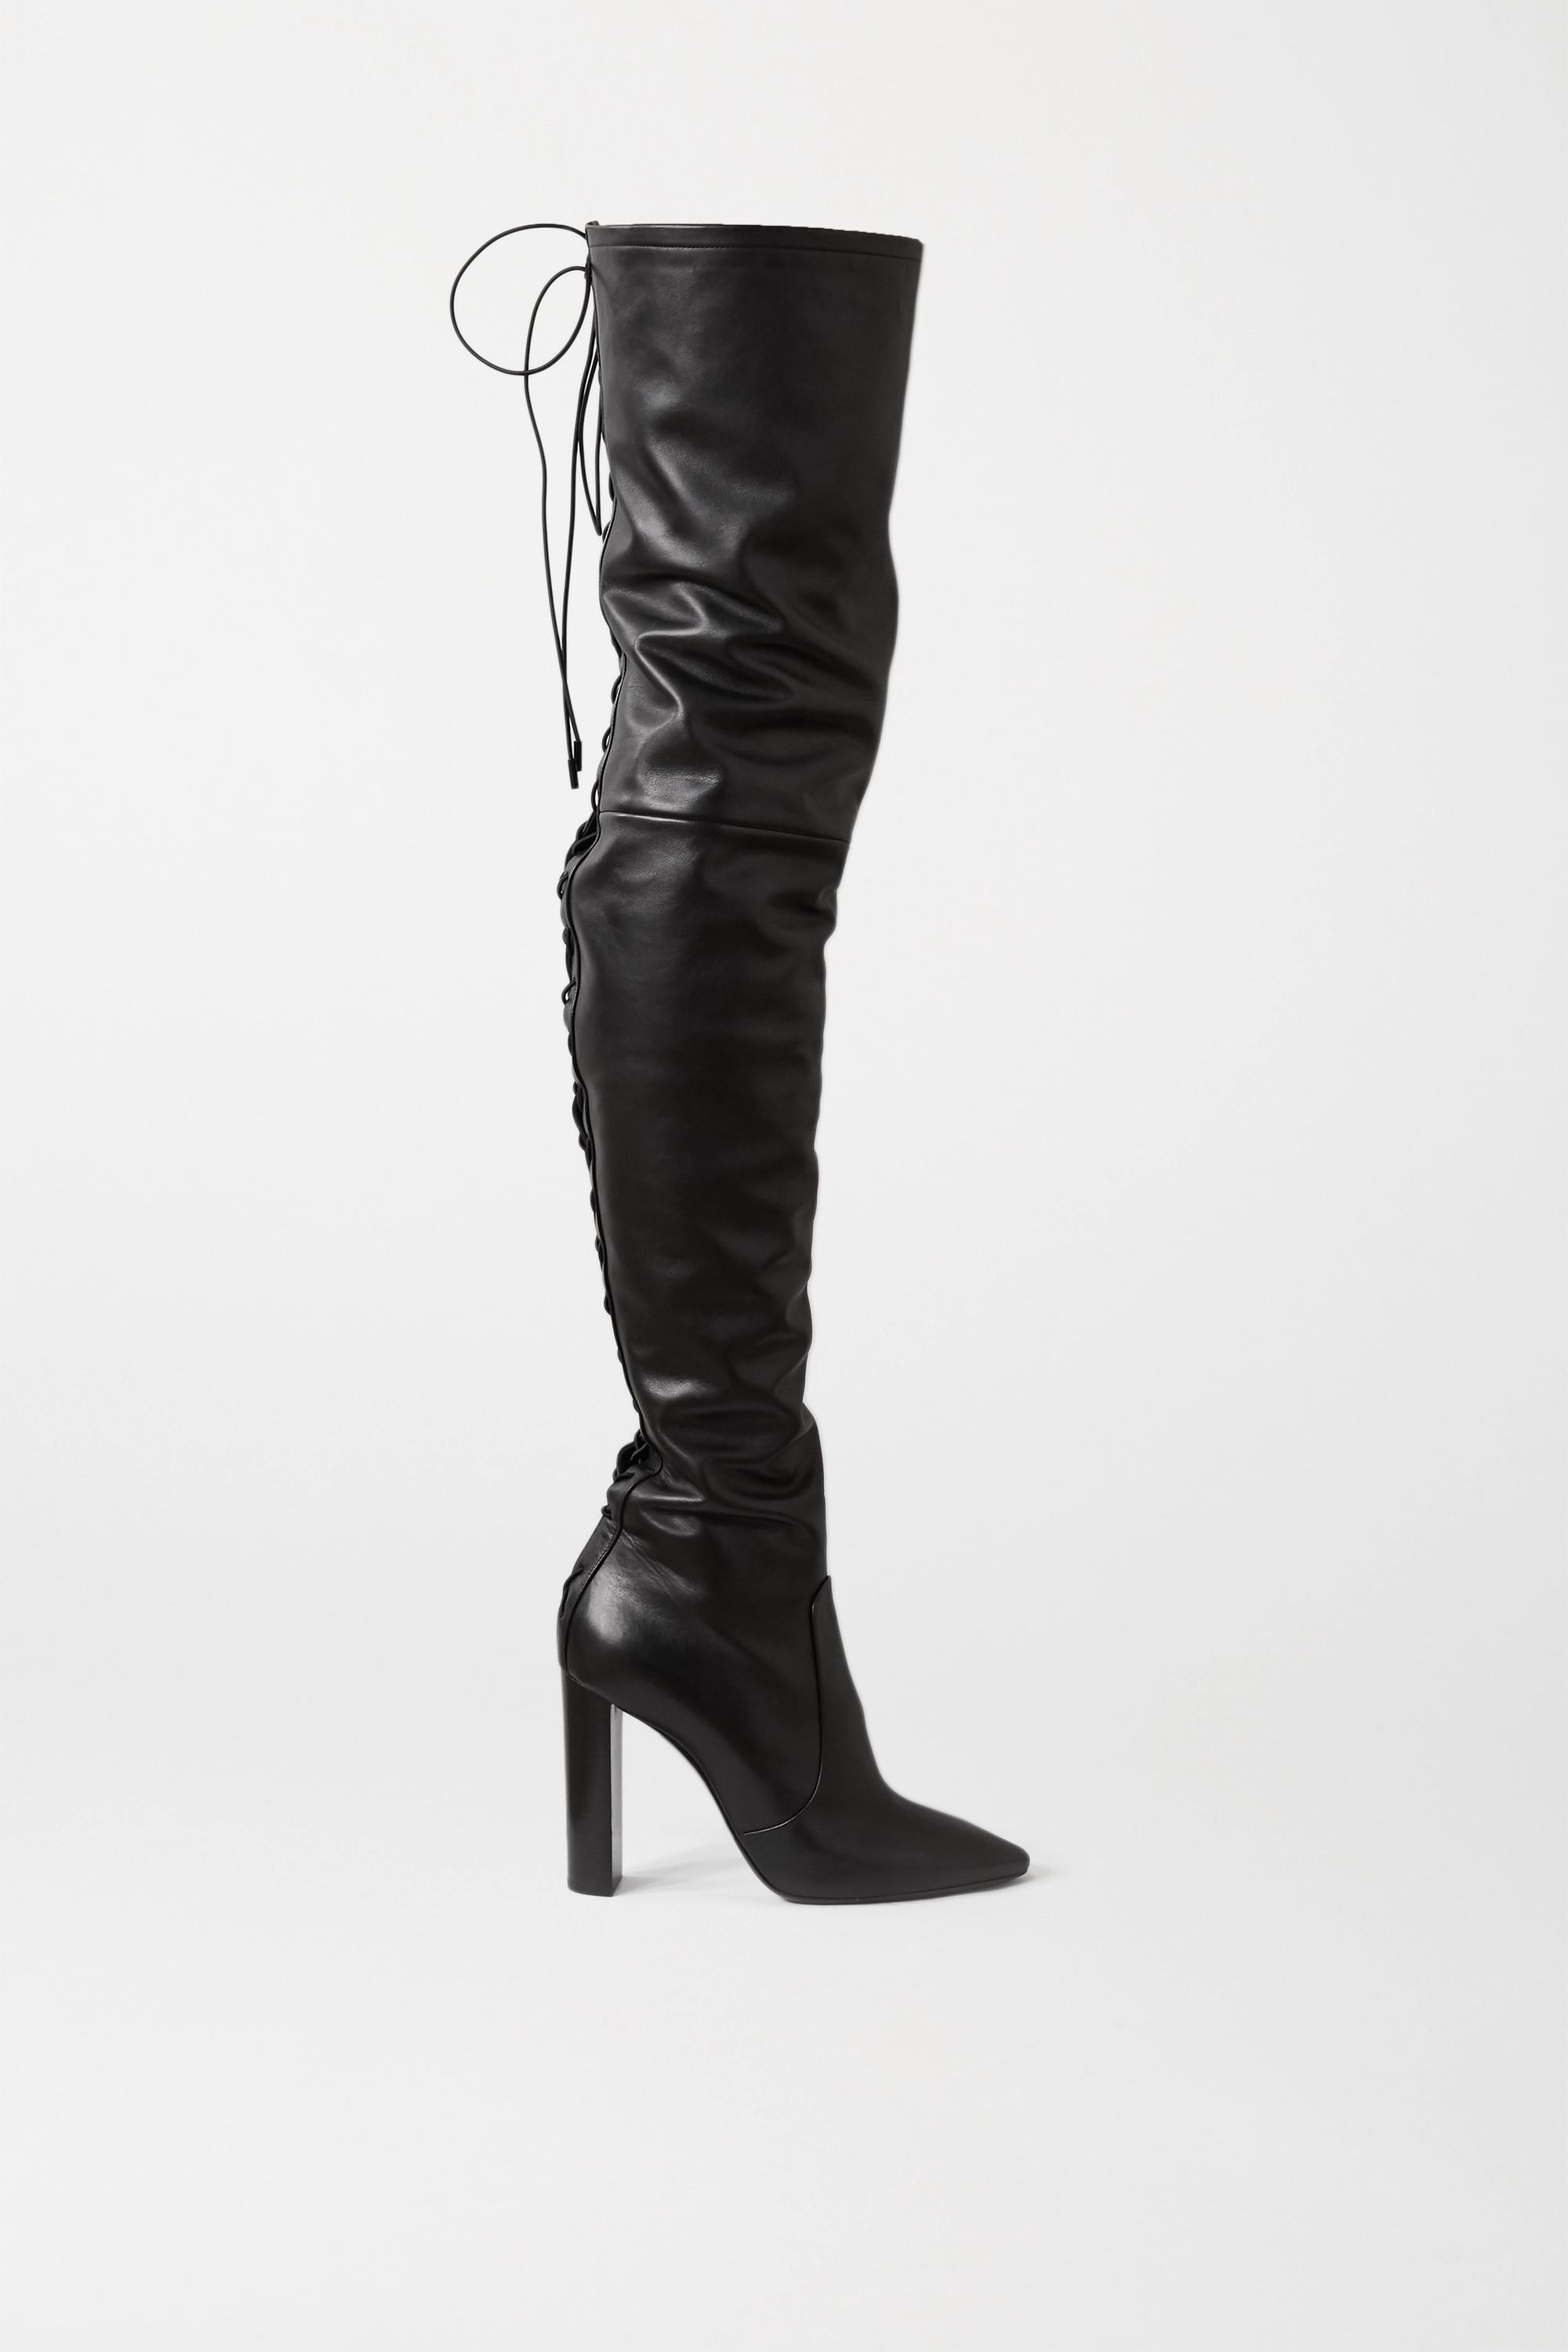 Saint Laurent Moon Lace-up Leather Over-the-knee Boots in Black | Lyst